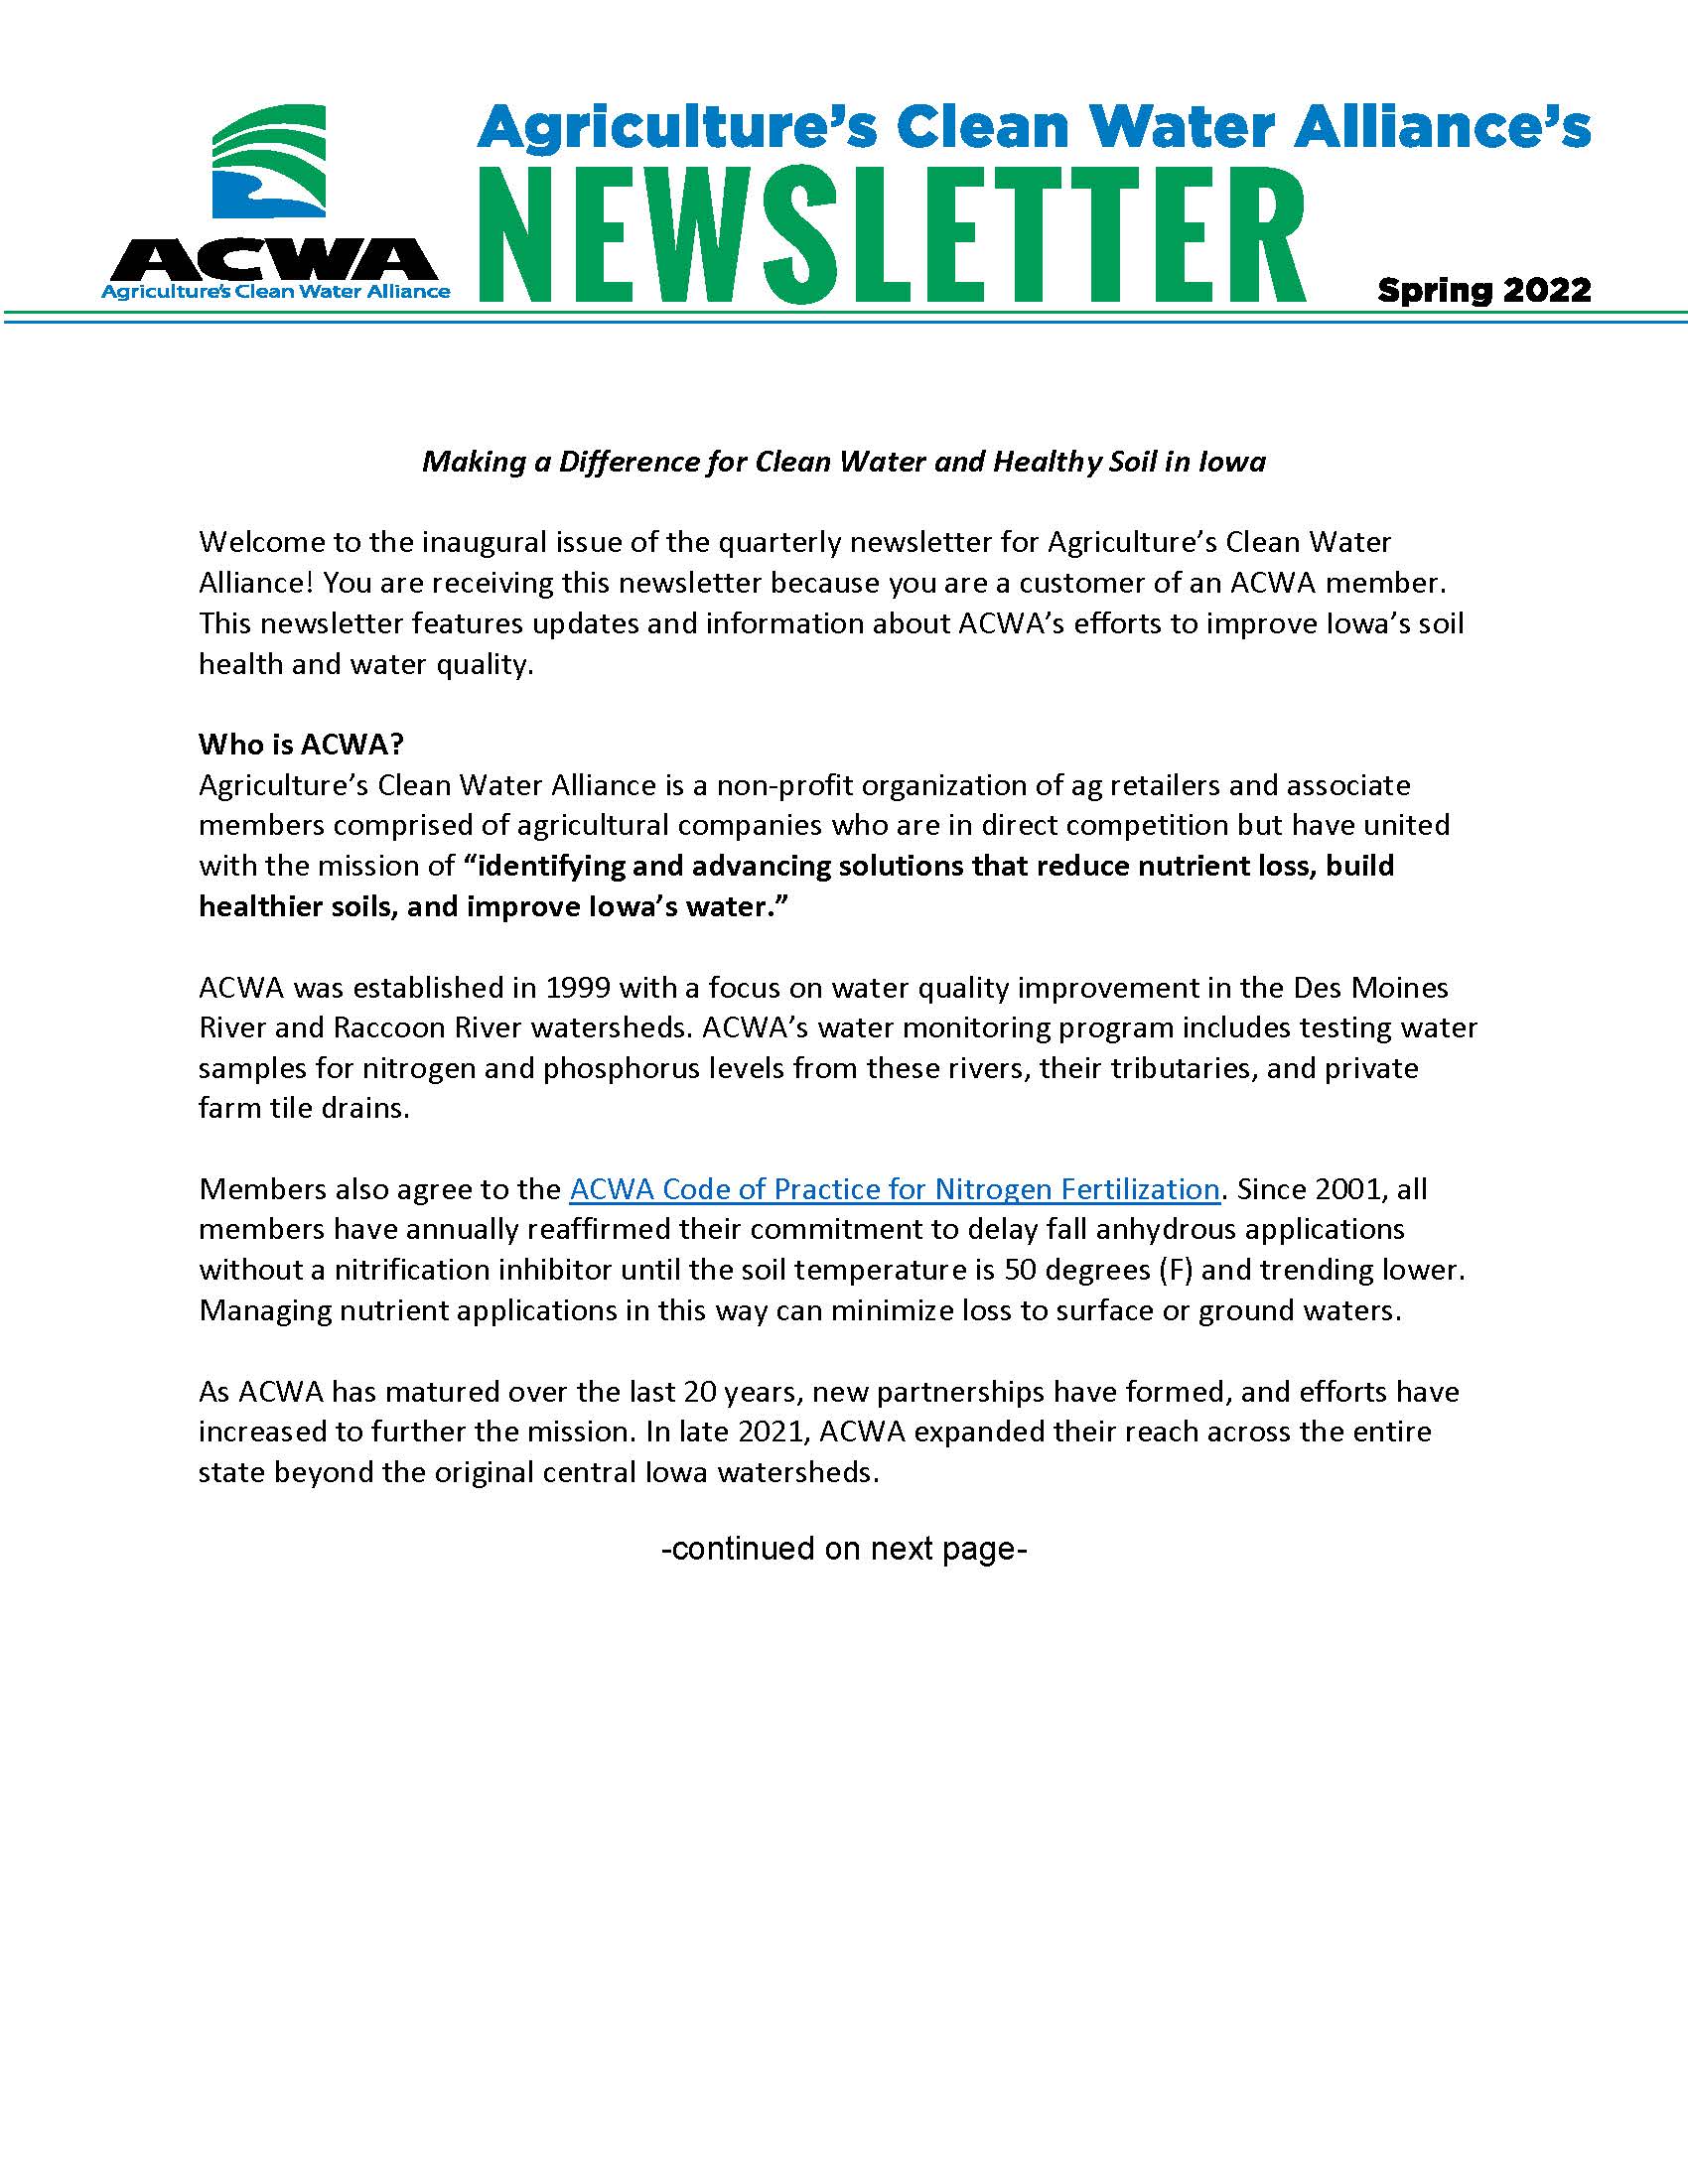 spring_2022_acwa_newsletter_Page_1.jpg